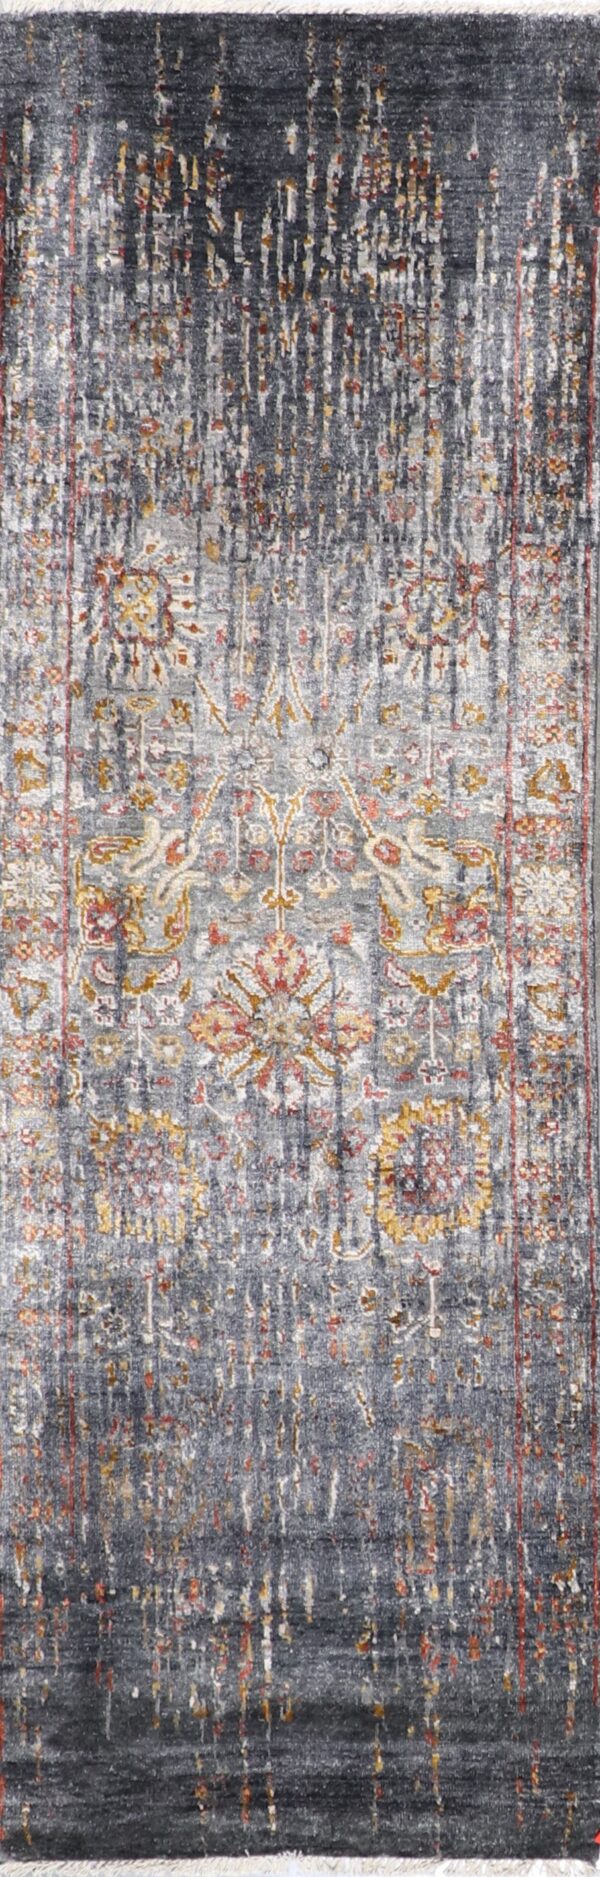 2’7”x10’ Transitional Gray Wool & Silk Hand-knotted Rug - Direct Rug Import | Rugs in Chicago, Indiana,South Bend,Granger